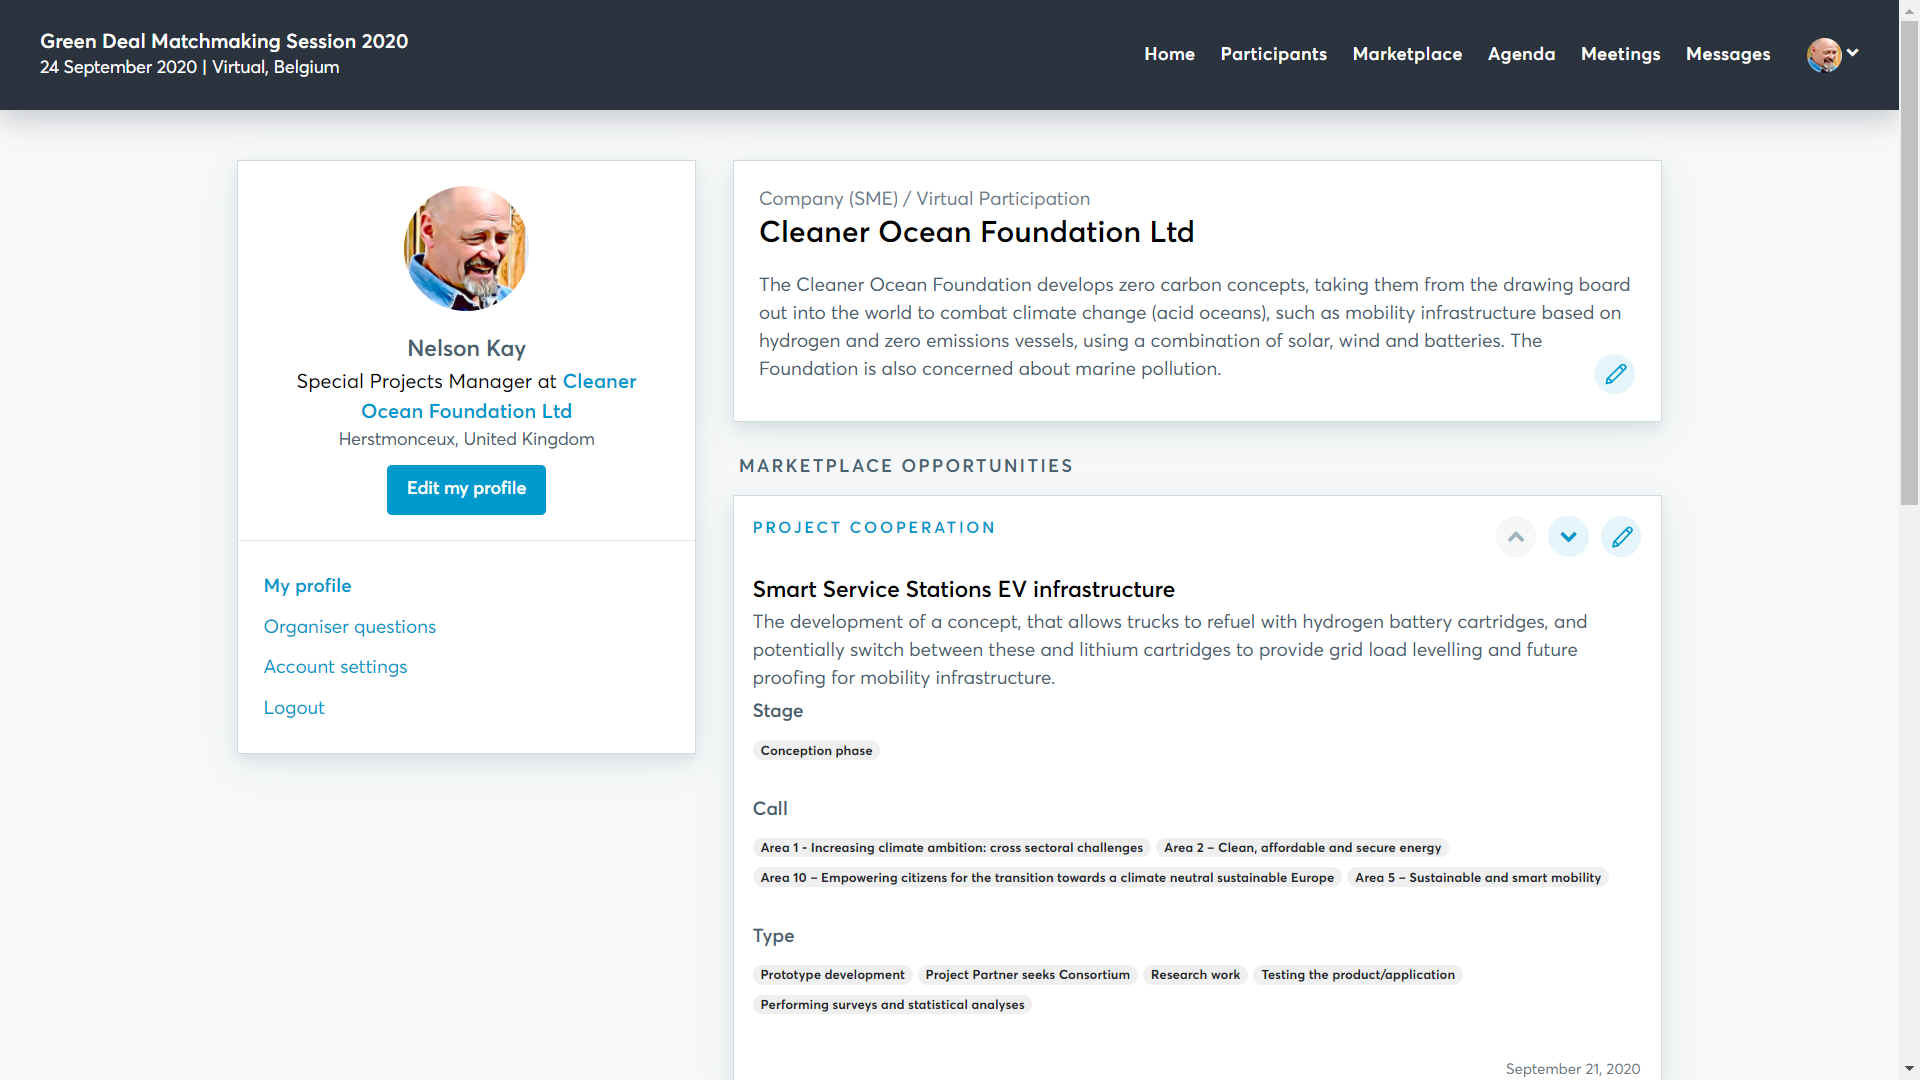 Nelson Kay is a volunteer with the Cleaner Ocean Foundation